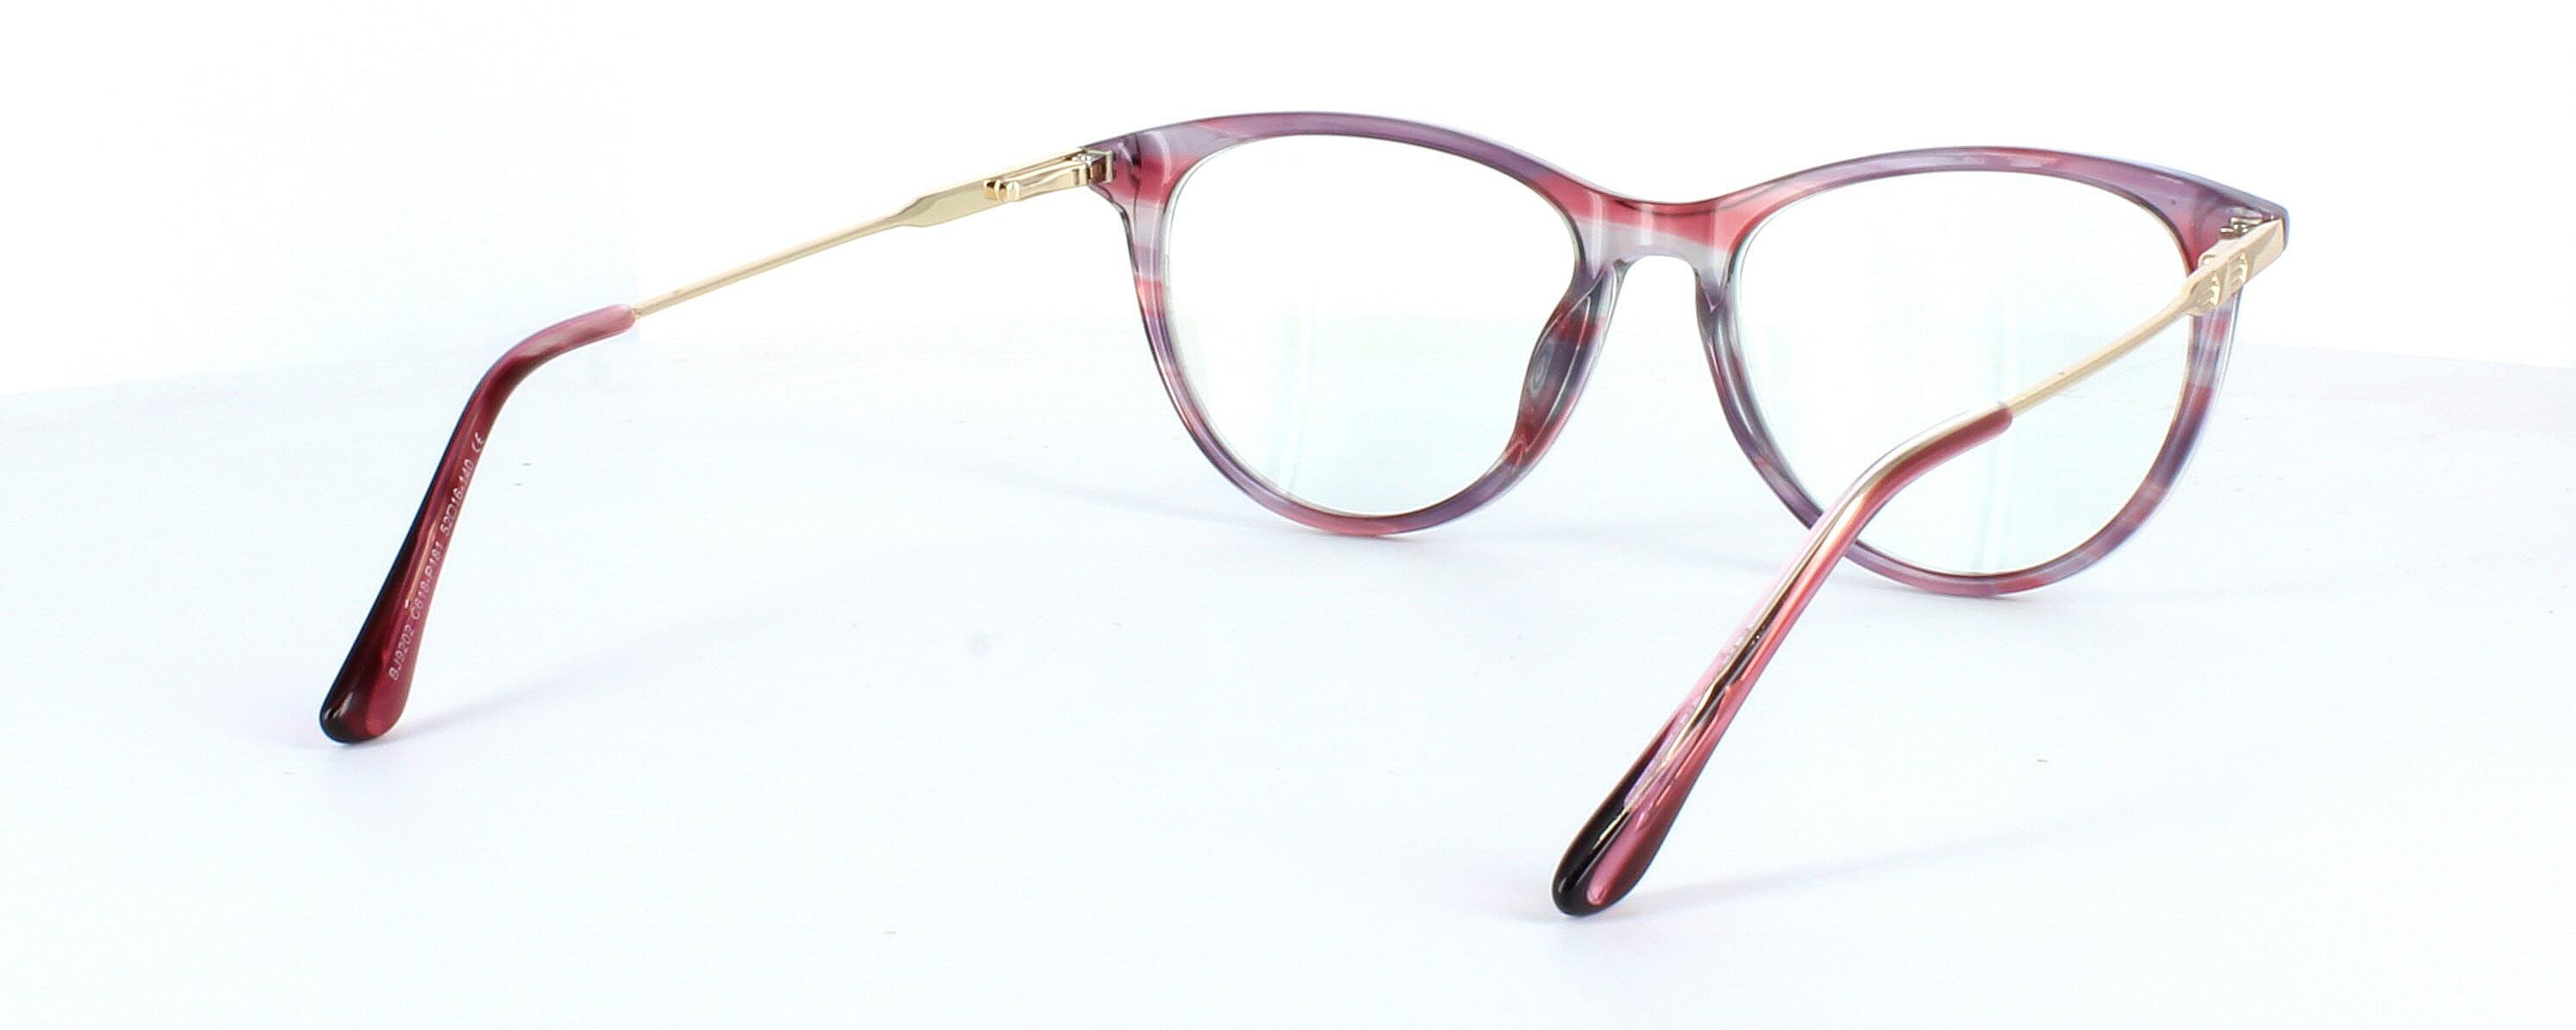 Edward Scotts BJ9201 C618 - Women's oval shaped shiny pink, purple and grey acetate glasses with gold metal spring hinged arms - image view 5